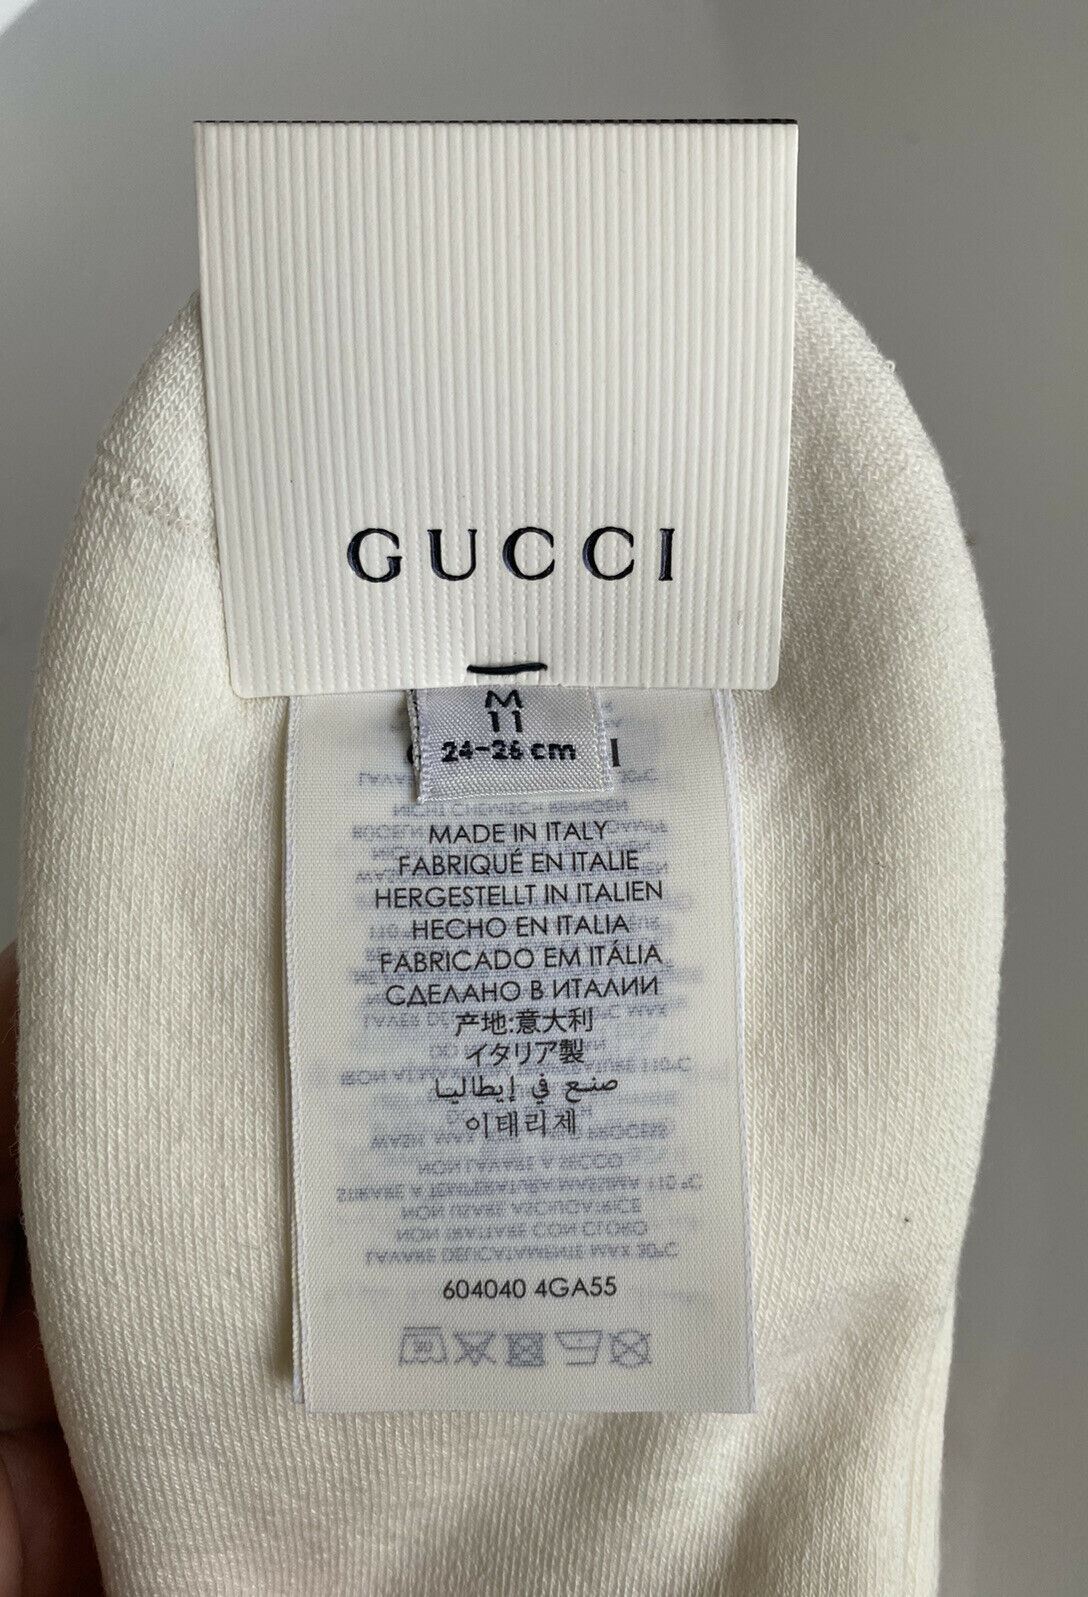 NWT Gucci Lit Spon White/Green/Red Socks M-L (24-26 cm) Made in Italy 604040